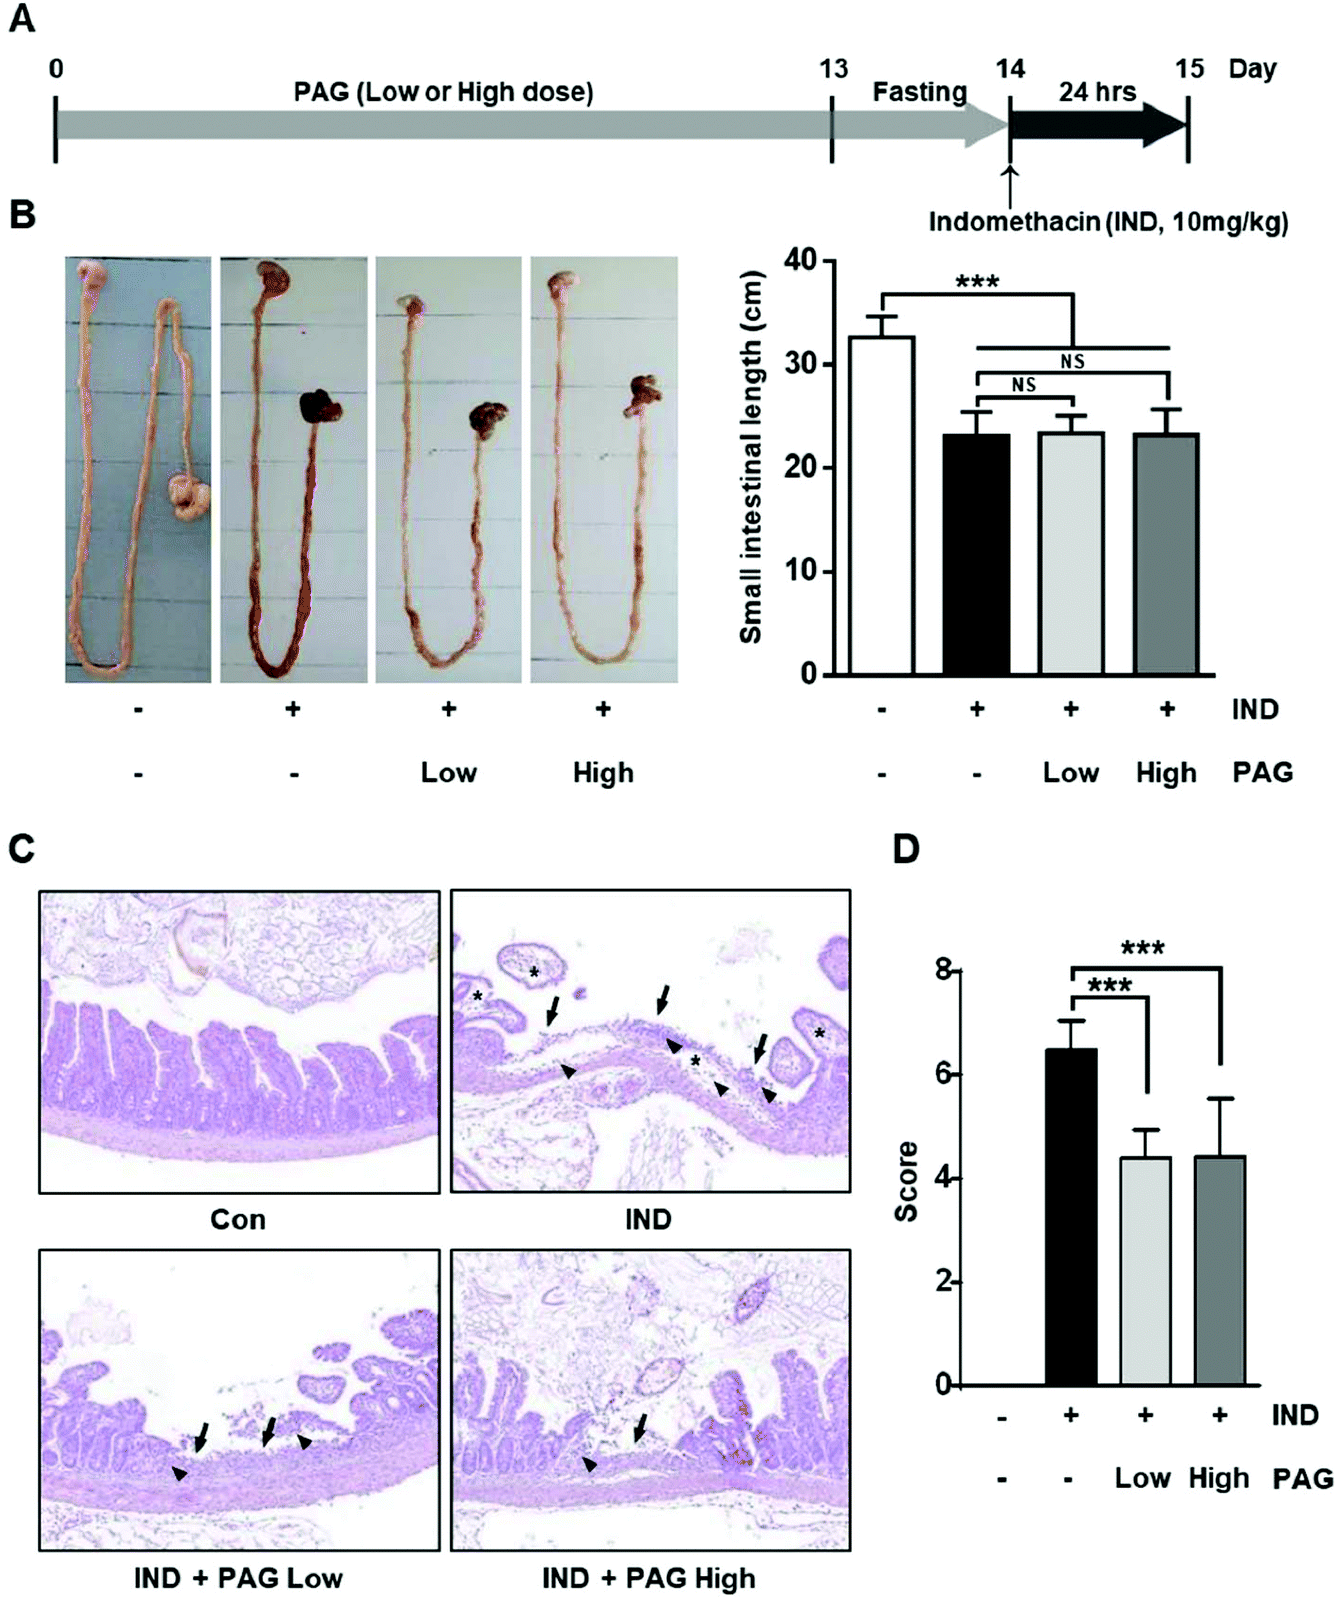 Processed Aloe vera gel attenuates non-steroidal anti-inflammatory drug  (NSAID)-induced small intestinal injury by enhancing mucin expression -  Food & Function (RSC Publishing)